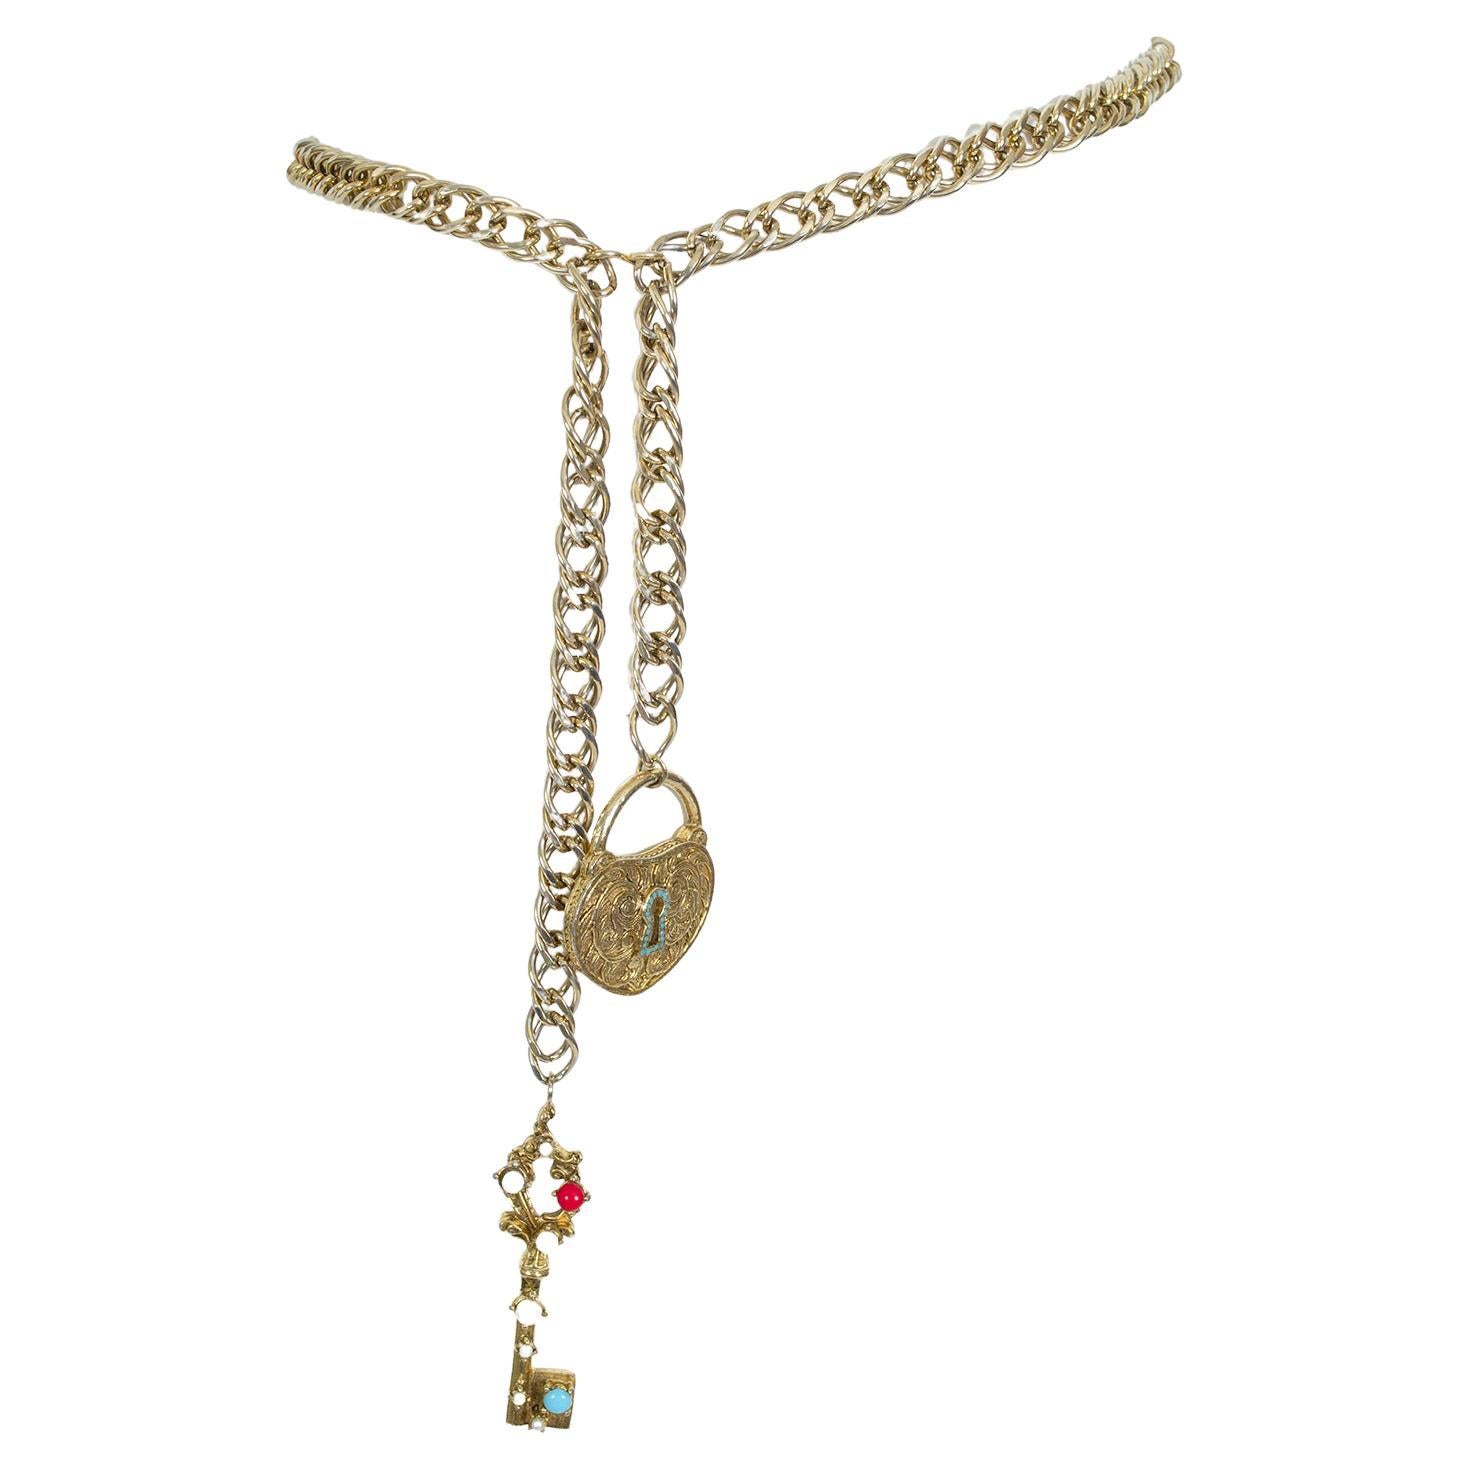 Pauline Rader Gold Lock and Key to My Heart Chain Belt Necklace – XS-S, 1960s